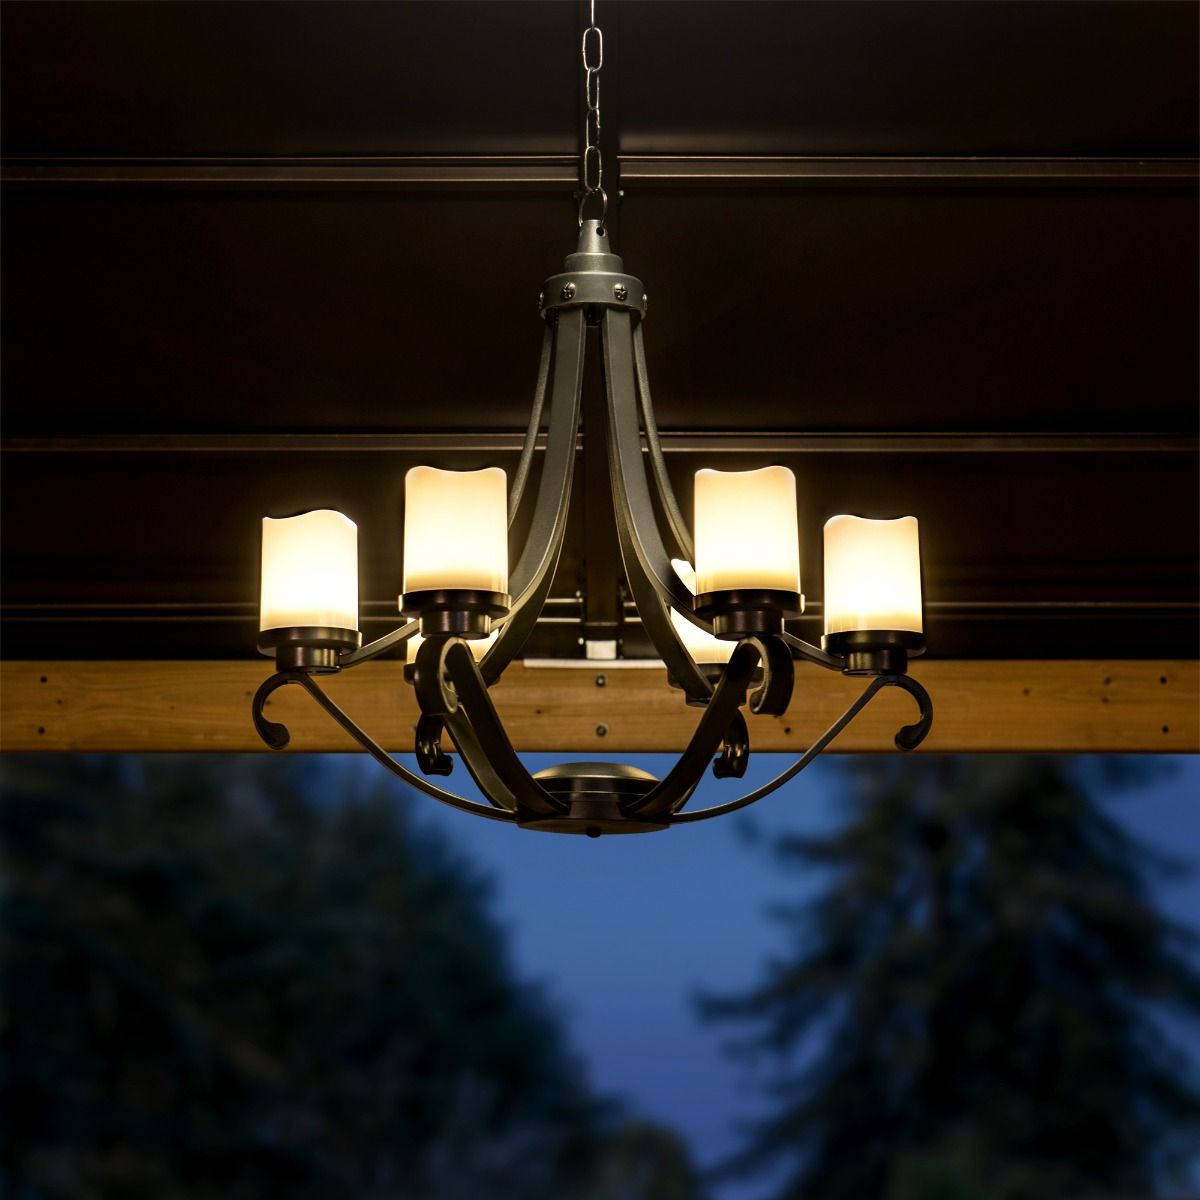 Best Outdoor Battery Powered Lights | lupon.gov.ph